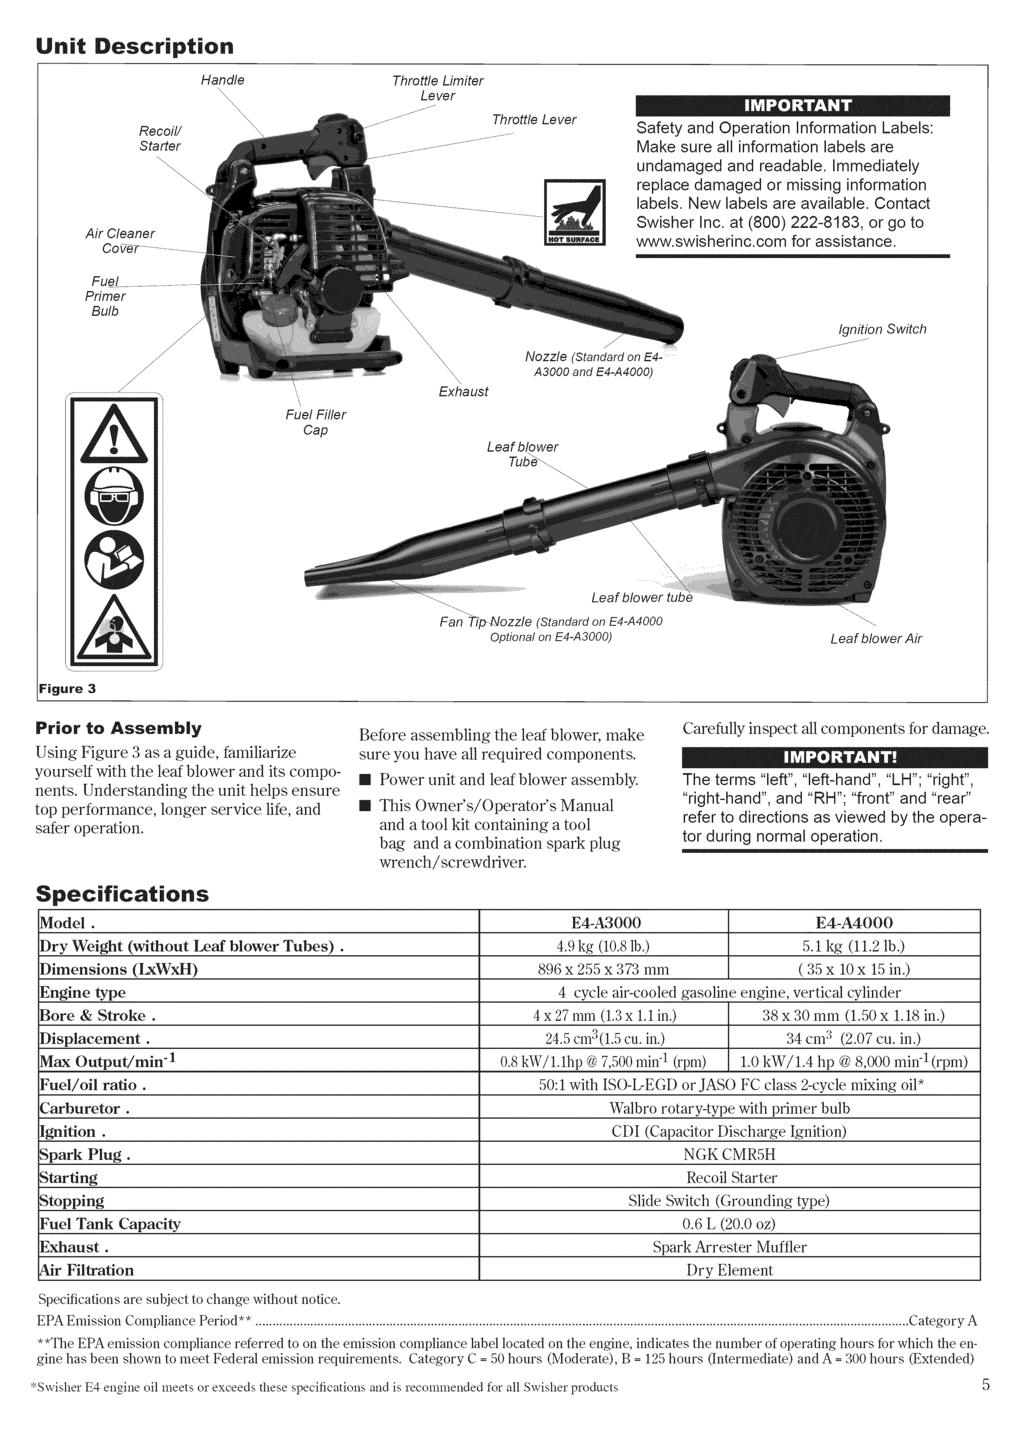 Unit Description Recoil/ Starter Handle \\\\\\ Throttle Limiter Lever _i-- Throttle Lever Safety and Operation Information Labels: Make sure all information labels are undamaged and readable.